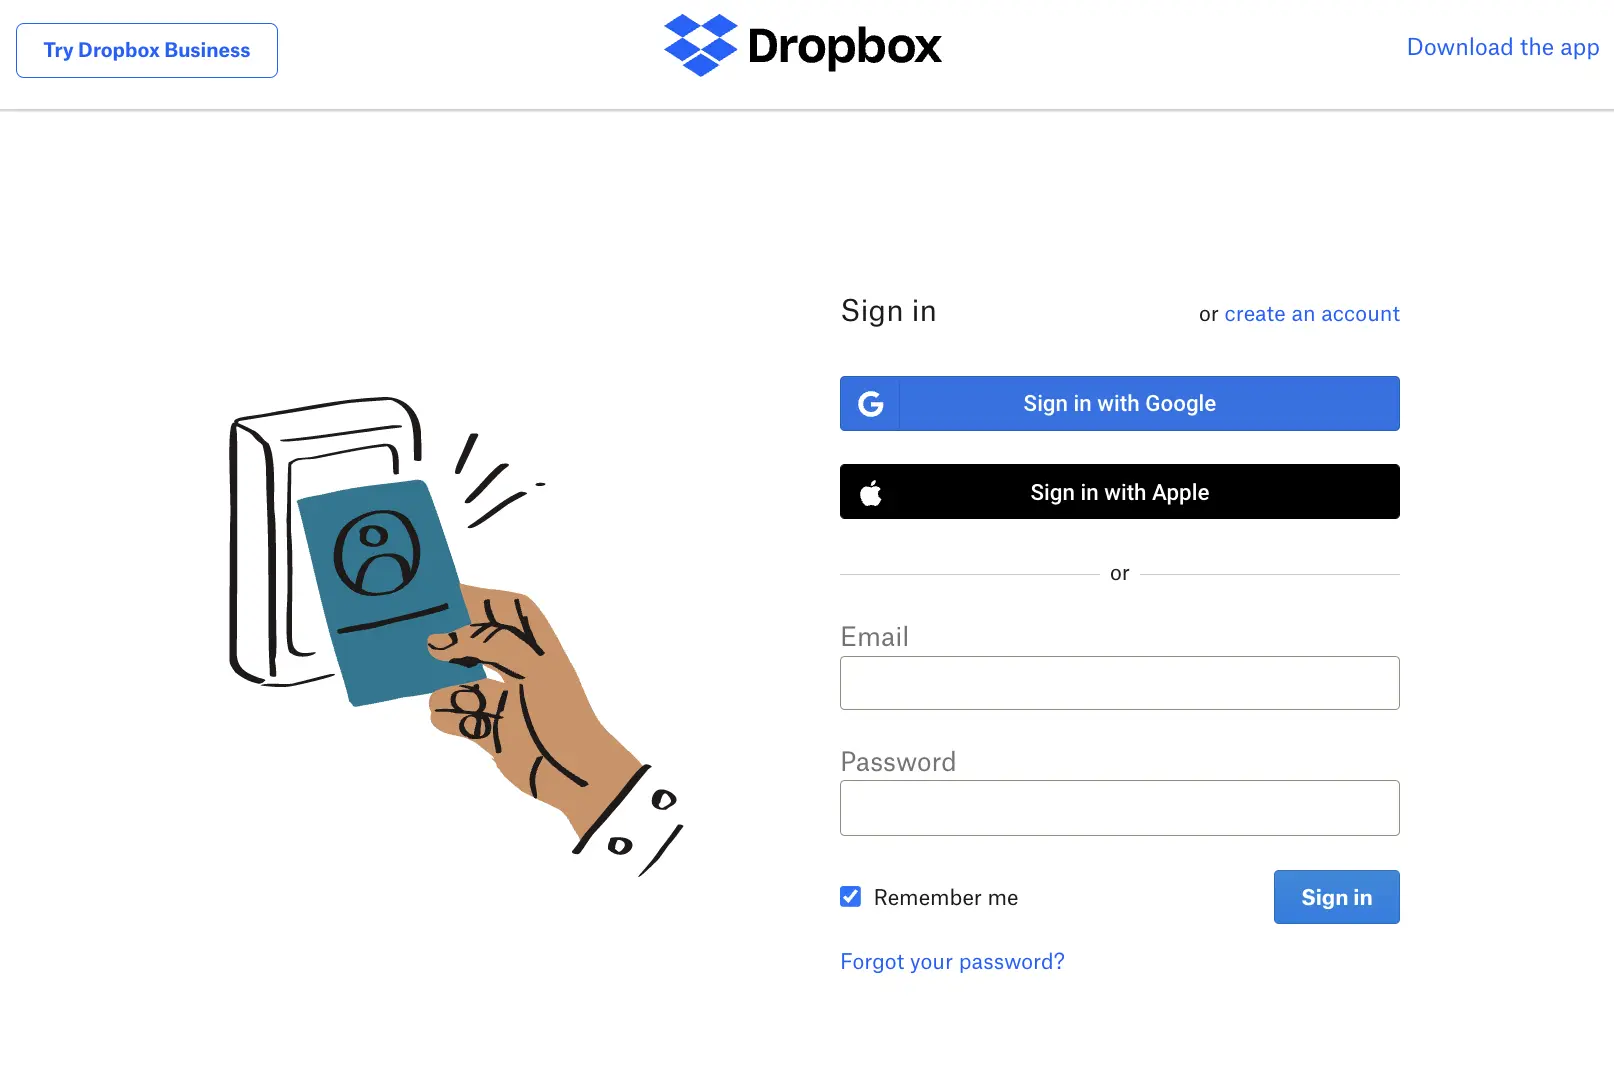 How to Sign Up on Dropbox Step by Step?